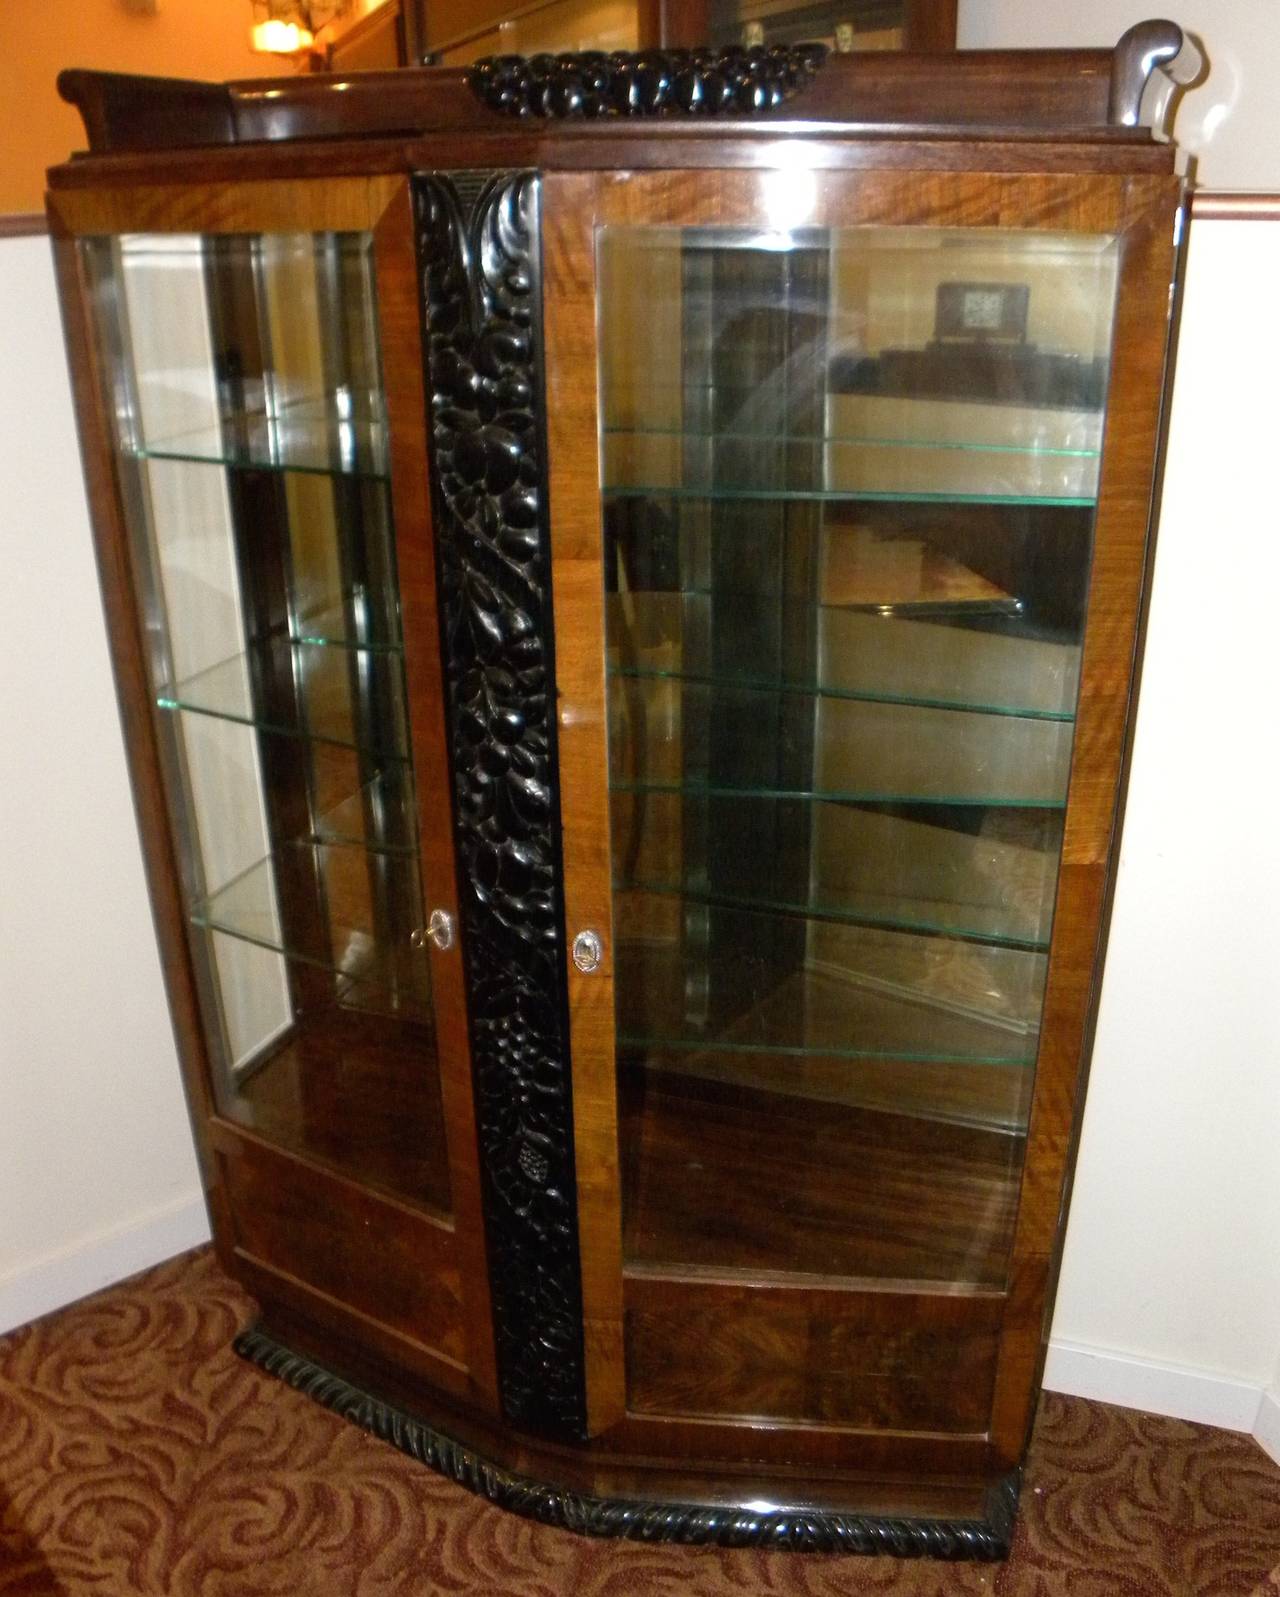 This display cabinet in walnut with glass front boasts a rich, dark, carved wood embellishment as it’s frontispiece. What better way to show off your collected treasures than this good sized vitrine with its polished edge glass shelves and beveled